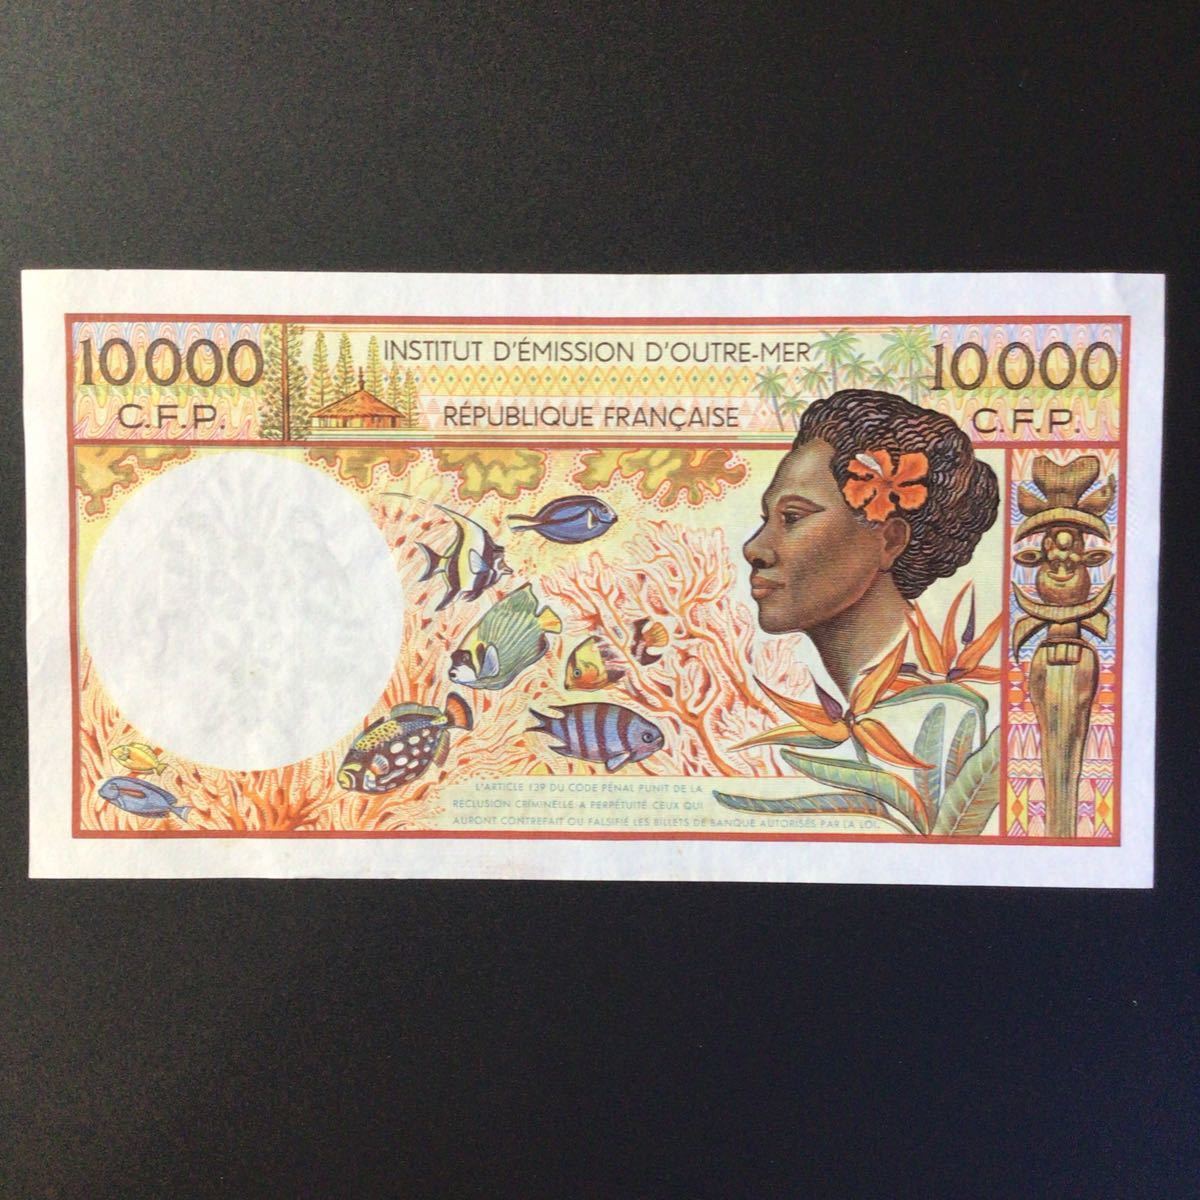 World Paper Money FRANCH PACIFIC TERRITORIES 10000 Francs【1985】_画像2